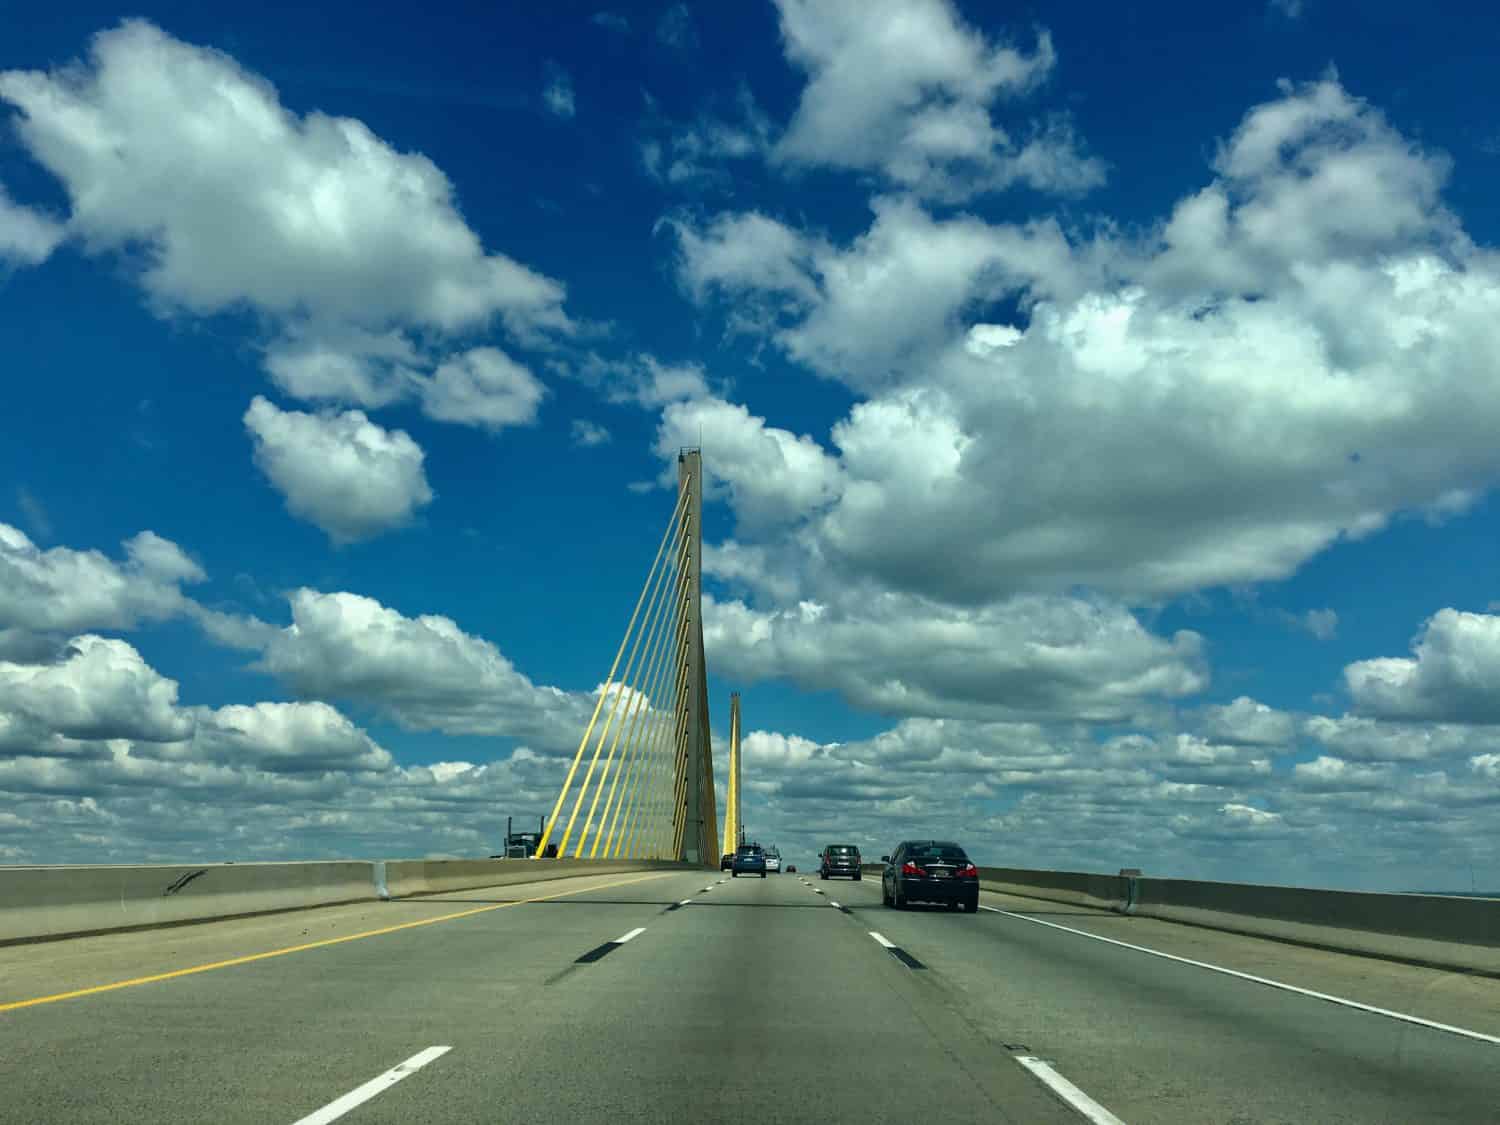 Passing through Senator William V. Roth Jr. Bridge, a concrete and steel cable-stayed bridge in Middletown, Delaware